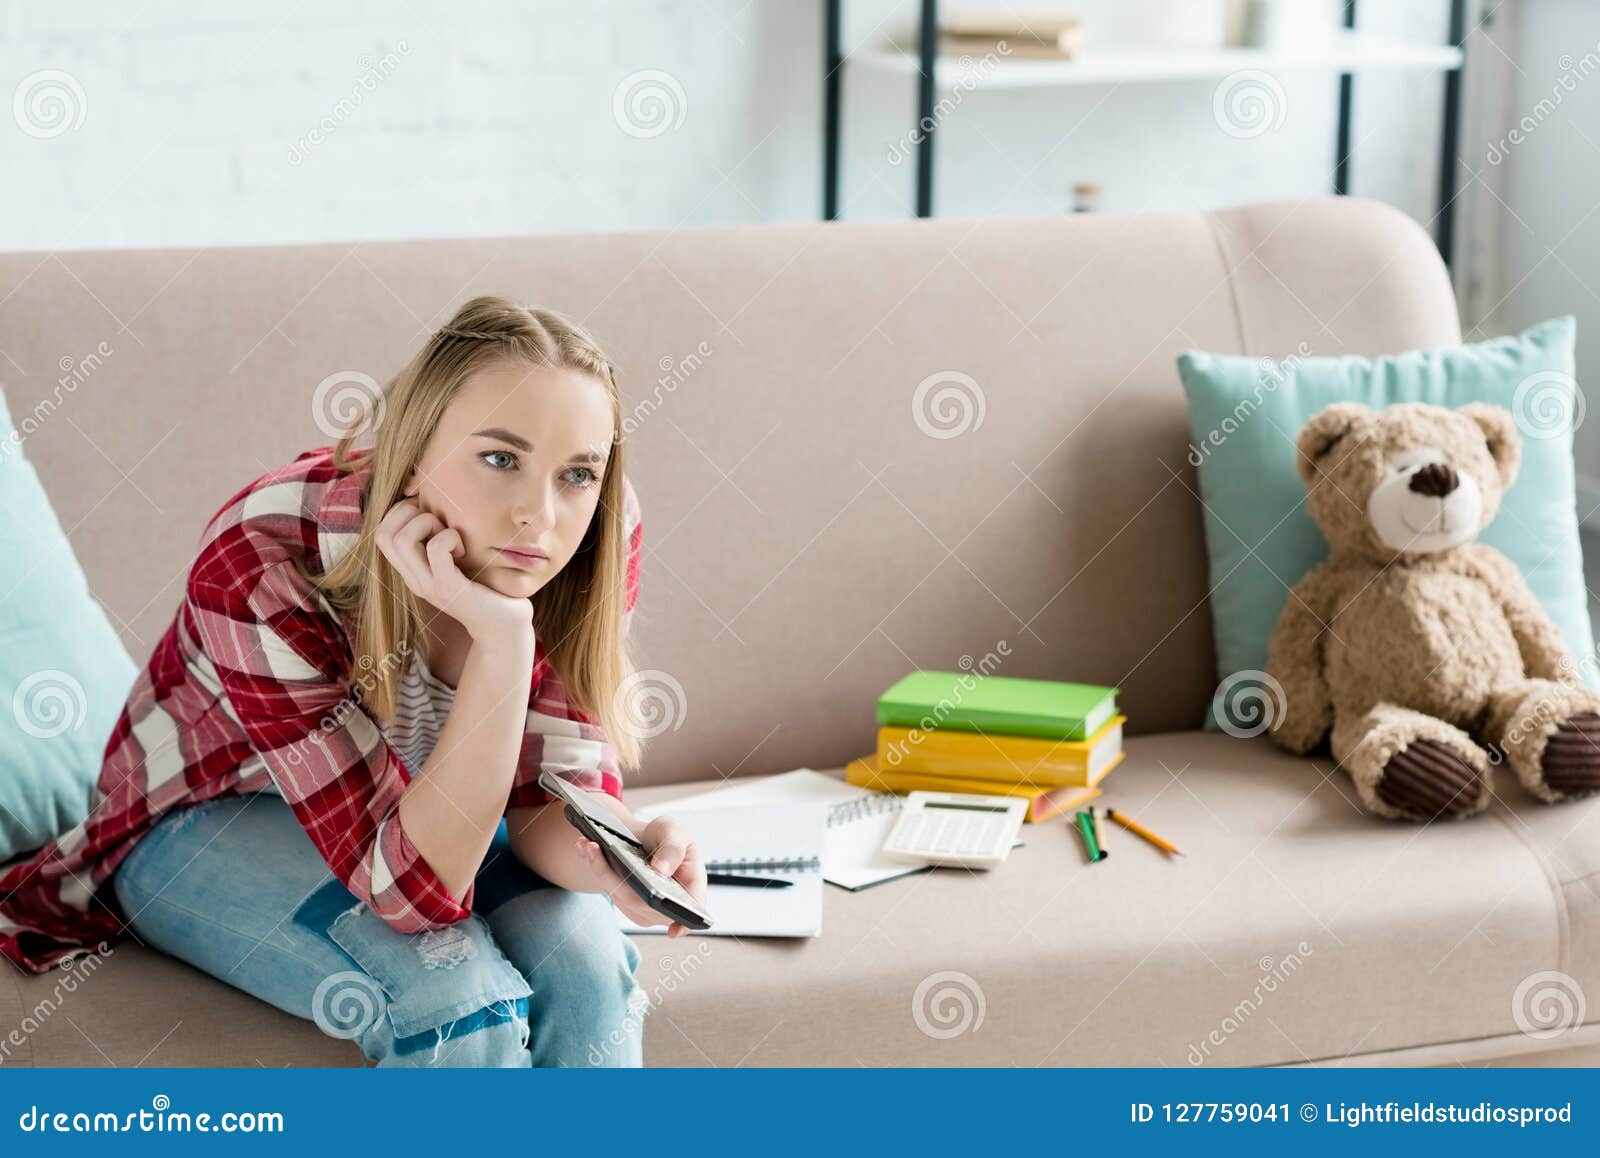 Bored Teen Student Girl With Remote Control Watching Tv While Sitting